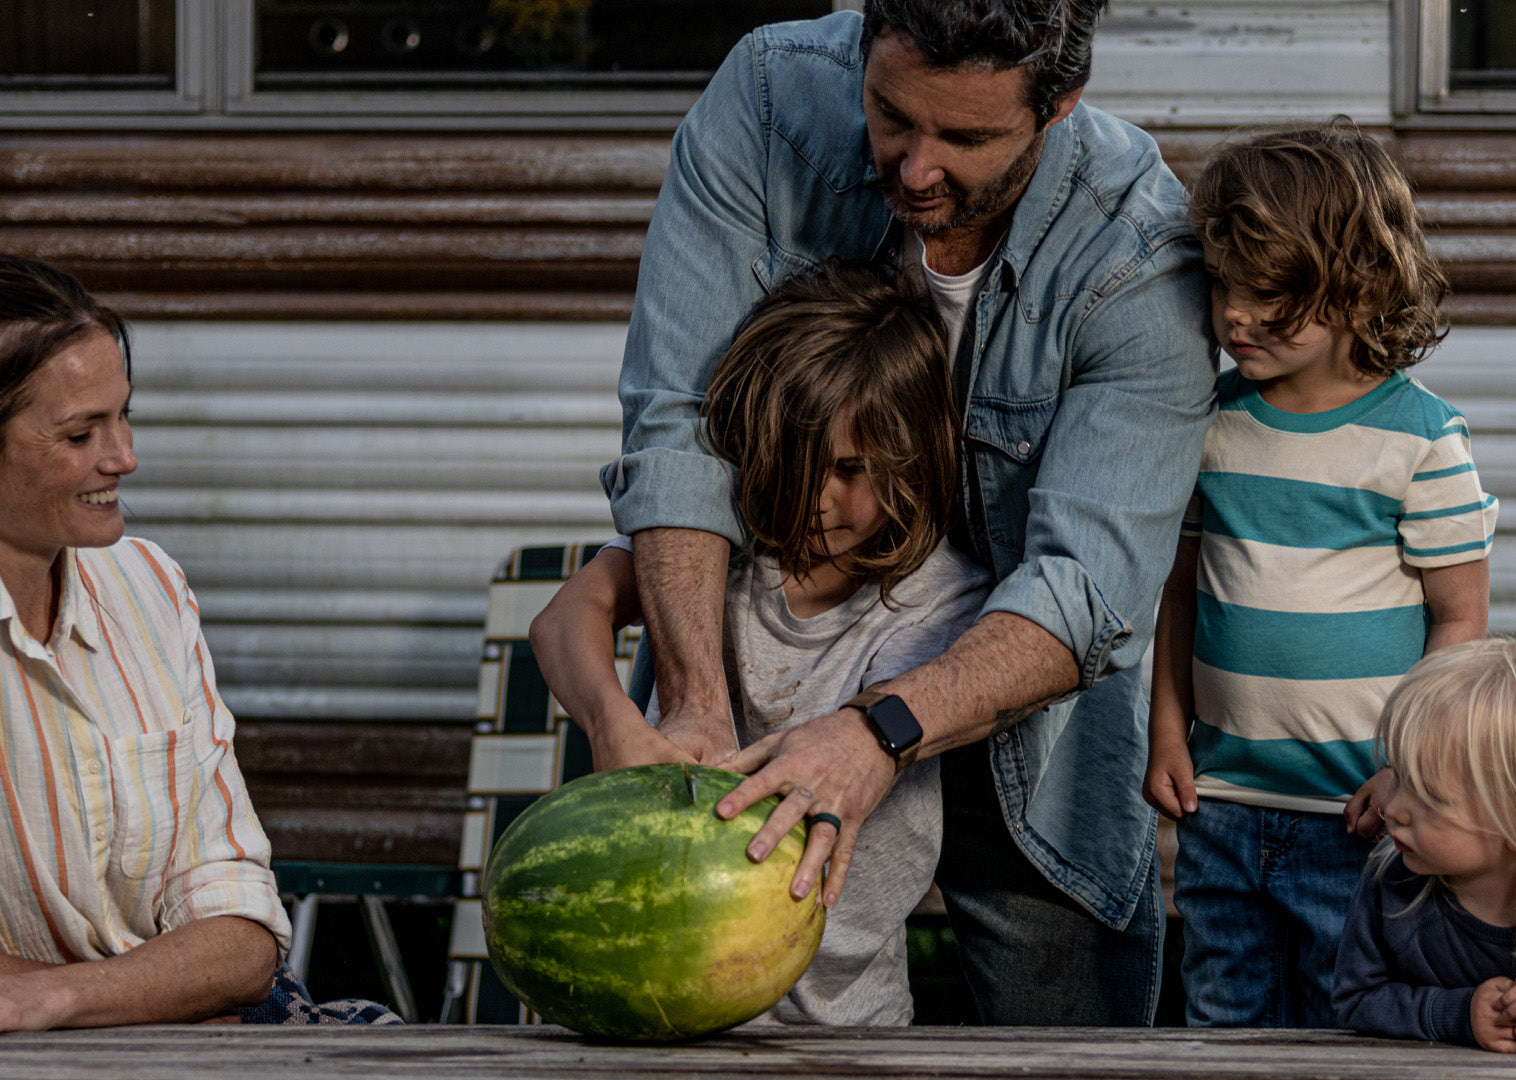 Image of a family cutting a watermelon outside wearing a Groove life watch band and rings